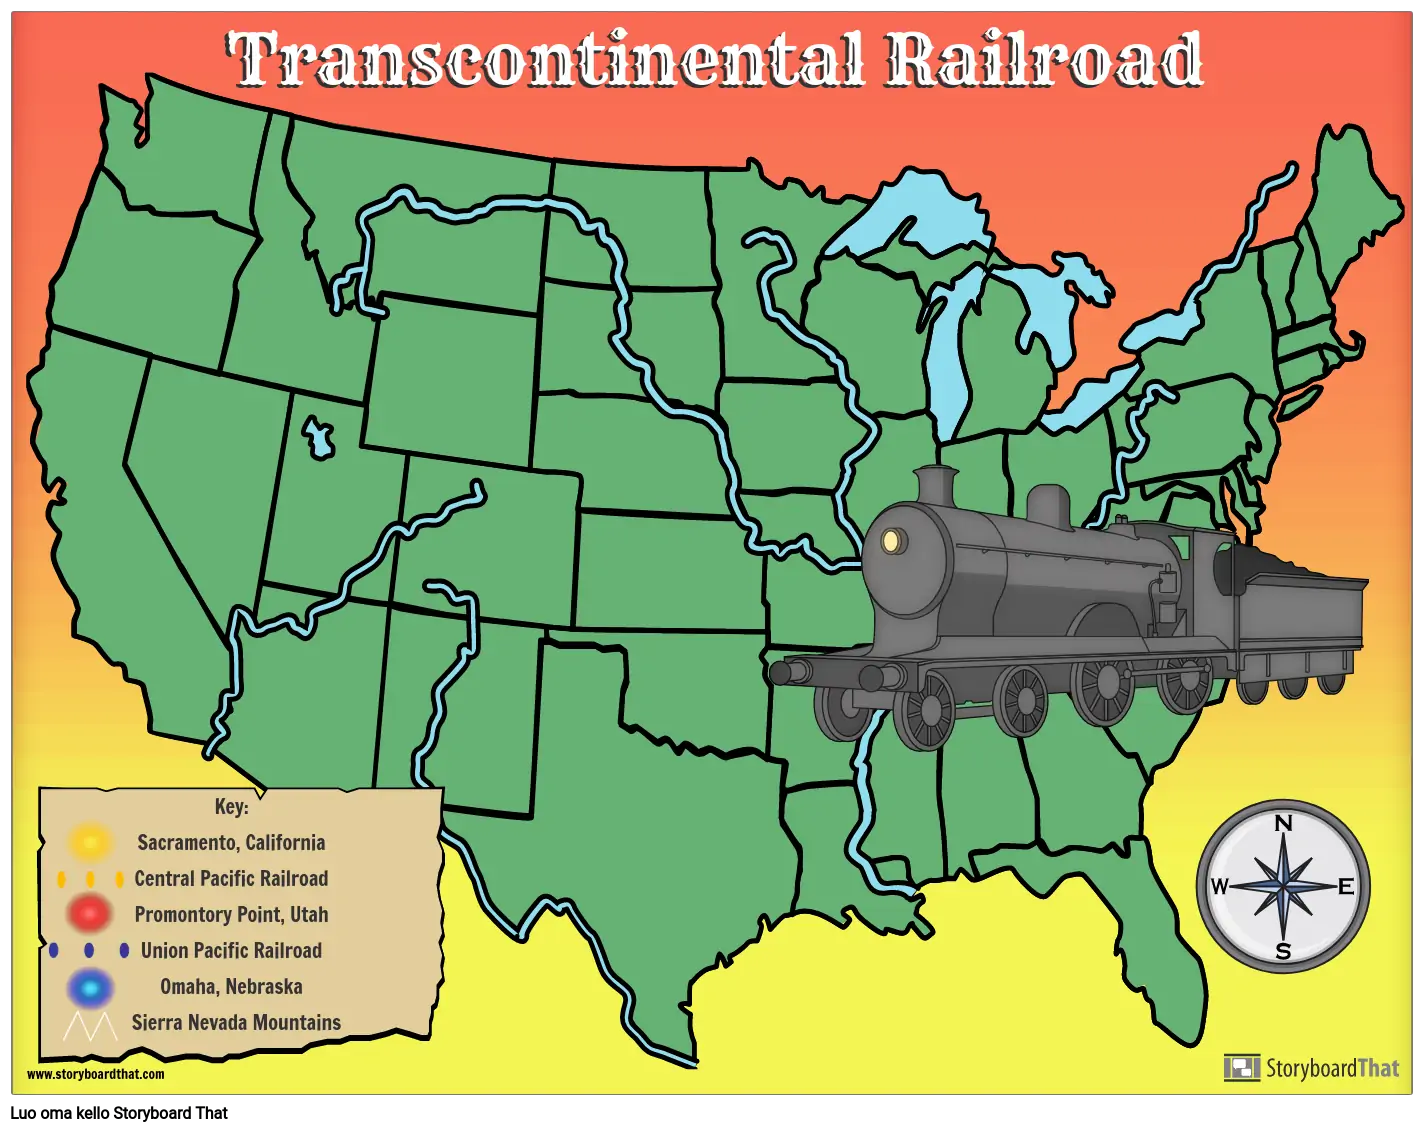 Transcontinental Railroad Map Template with Symbols